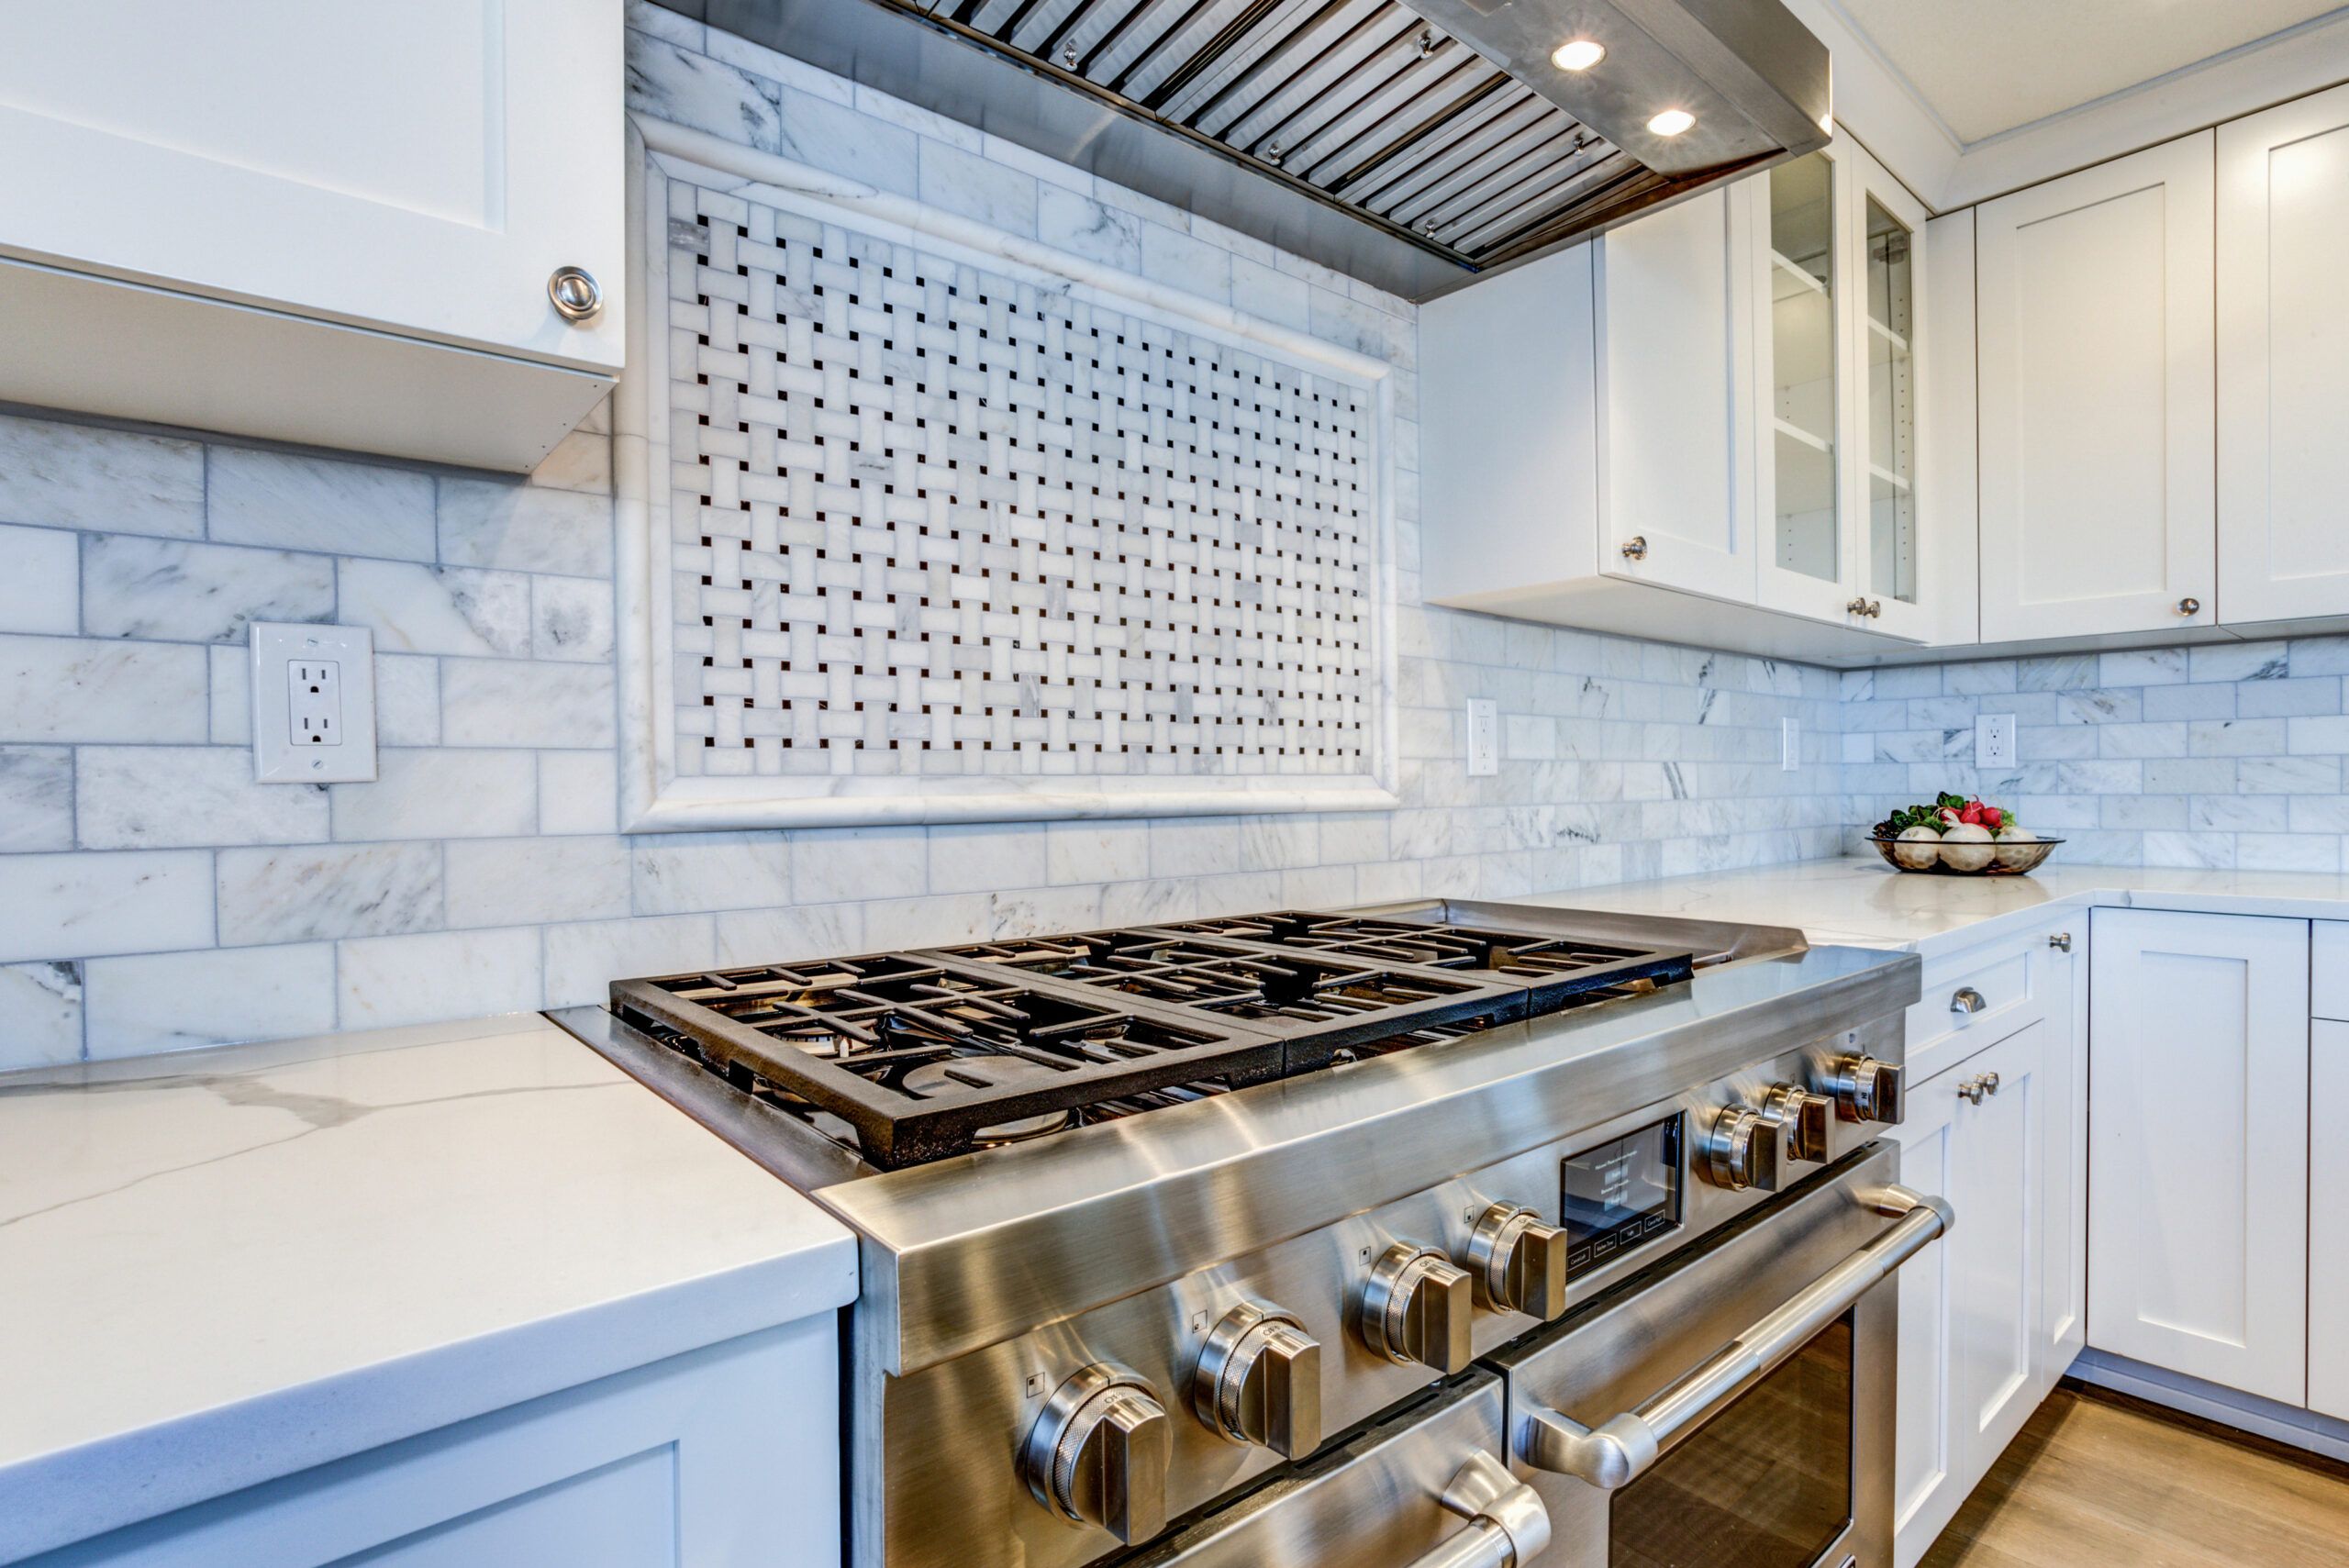 Lifestyle image of a stainless-steel cooking range in a sparkling modern kitchen. Cover image for the This Old House Reviews Team's guide on how to remove scratches from stainless steel surfaces.